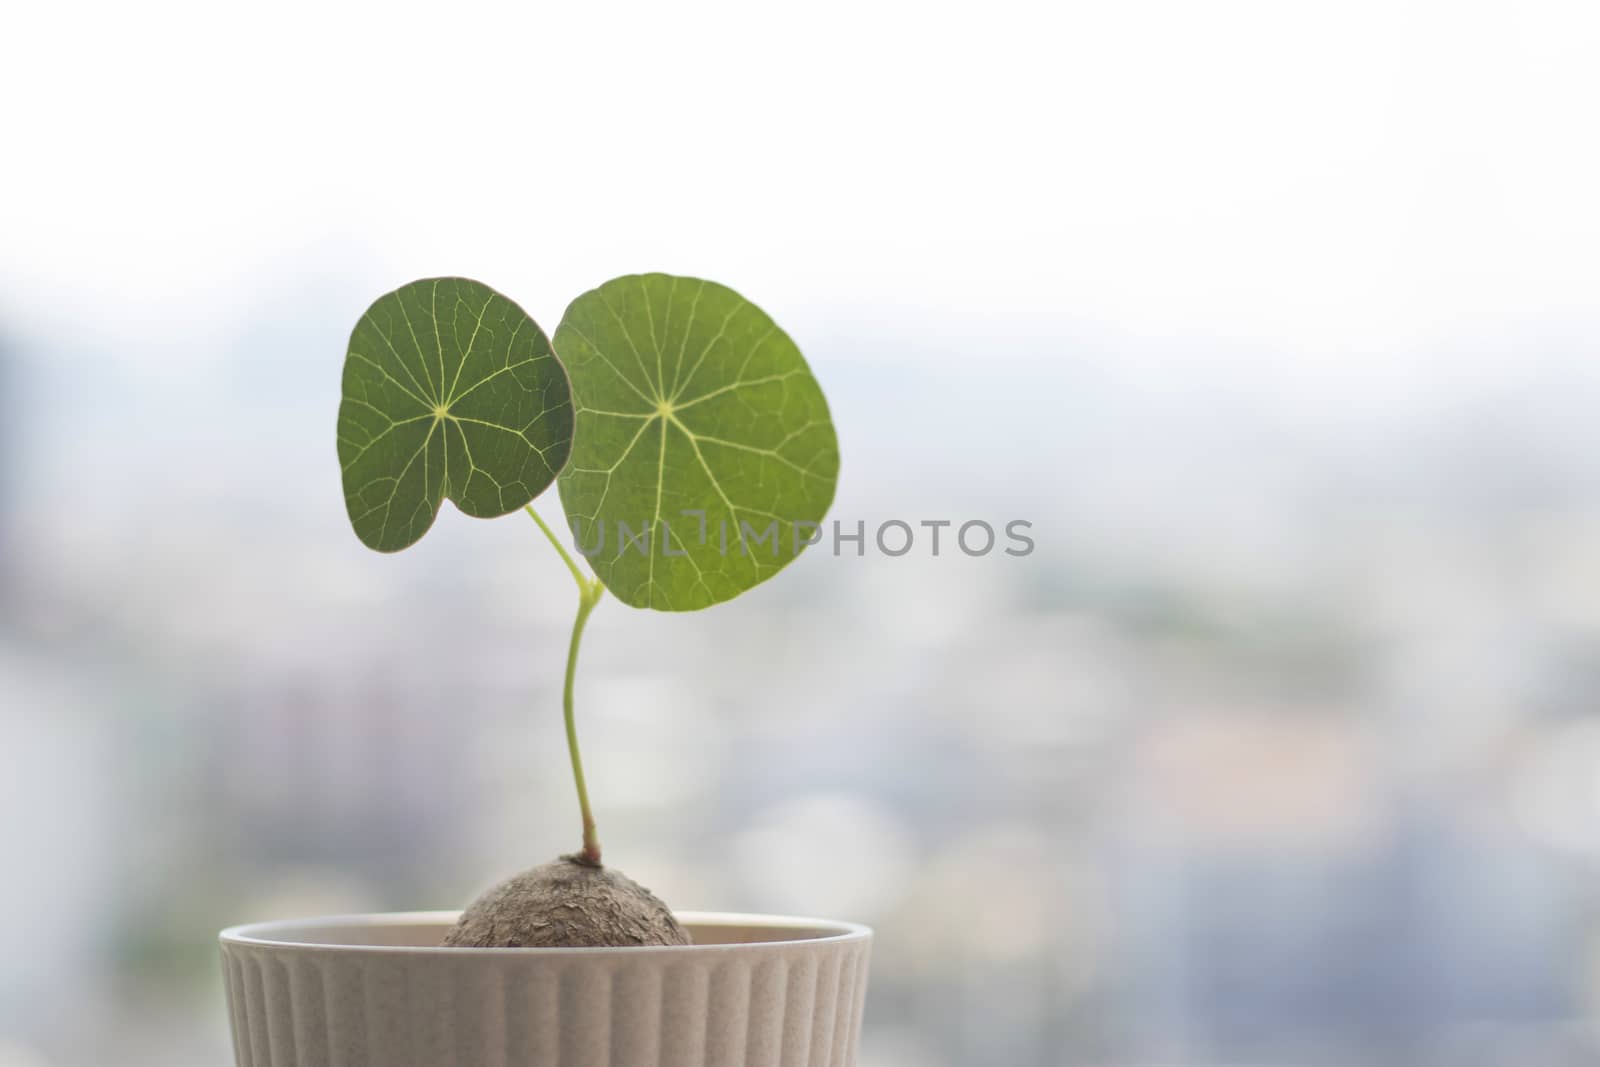 Stephania erecta with blurred background. Herbaceous plant with spherical leaves on blurred background.